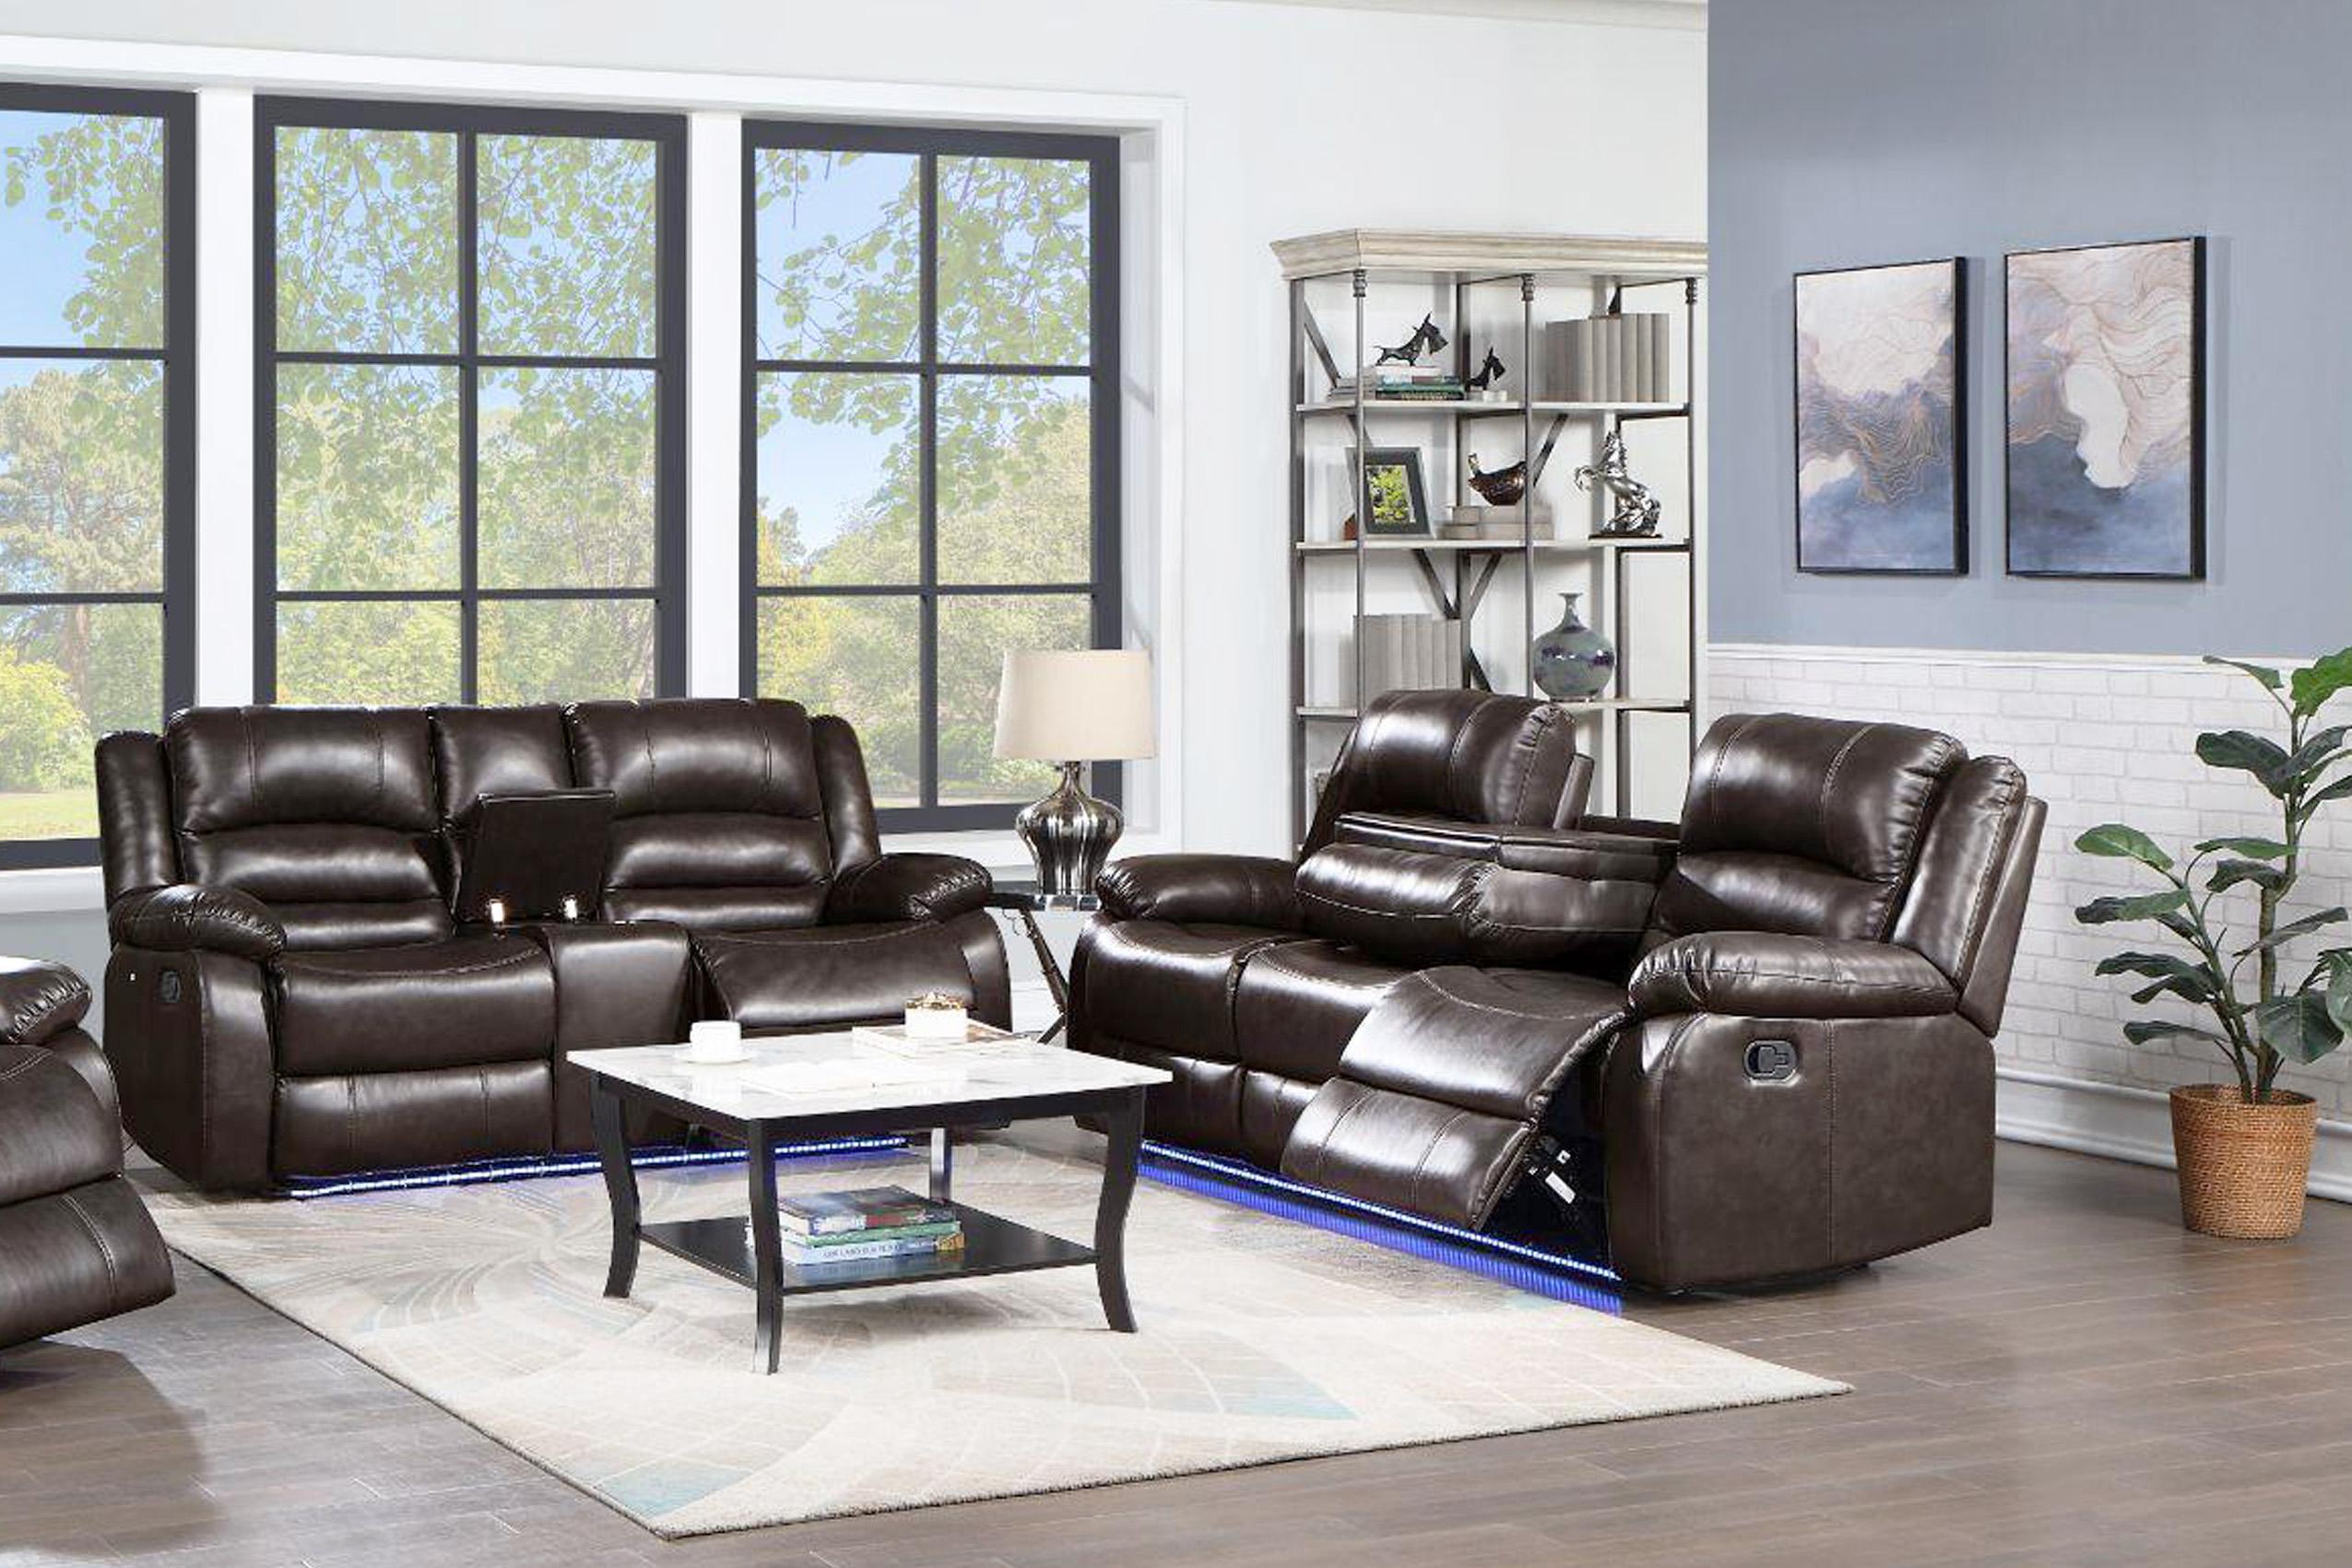 

    
Brown Faux Leather Manual Recliner Sofa MARTIN Galaxy Home Contemporary Modern
